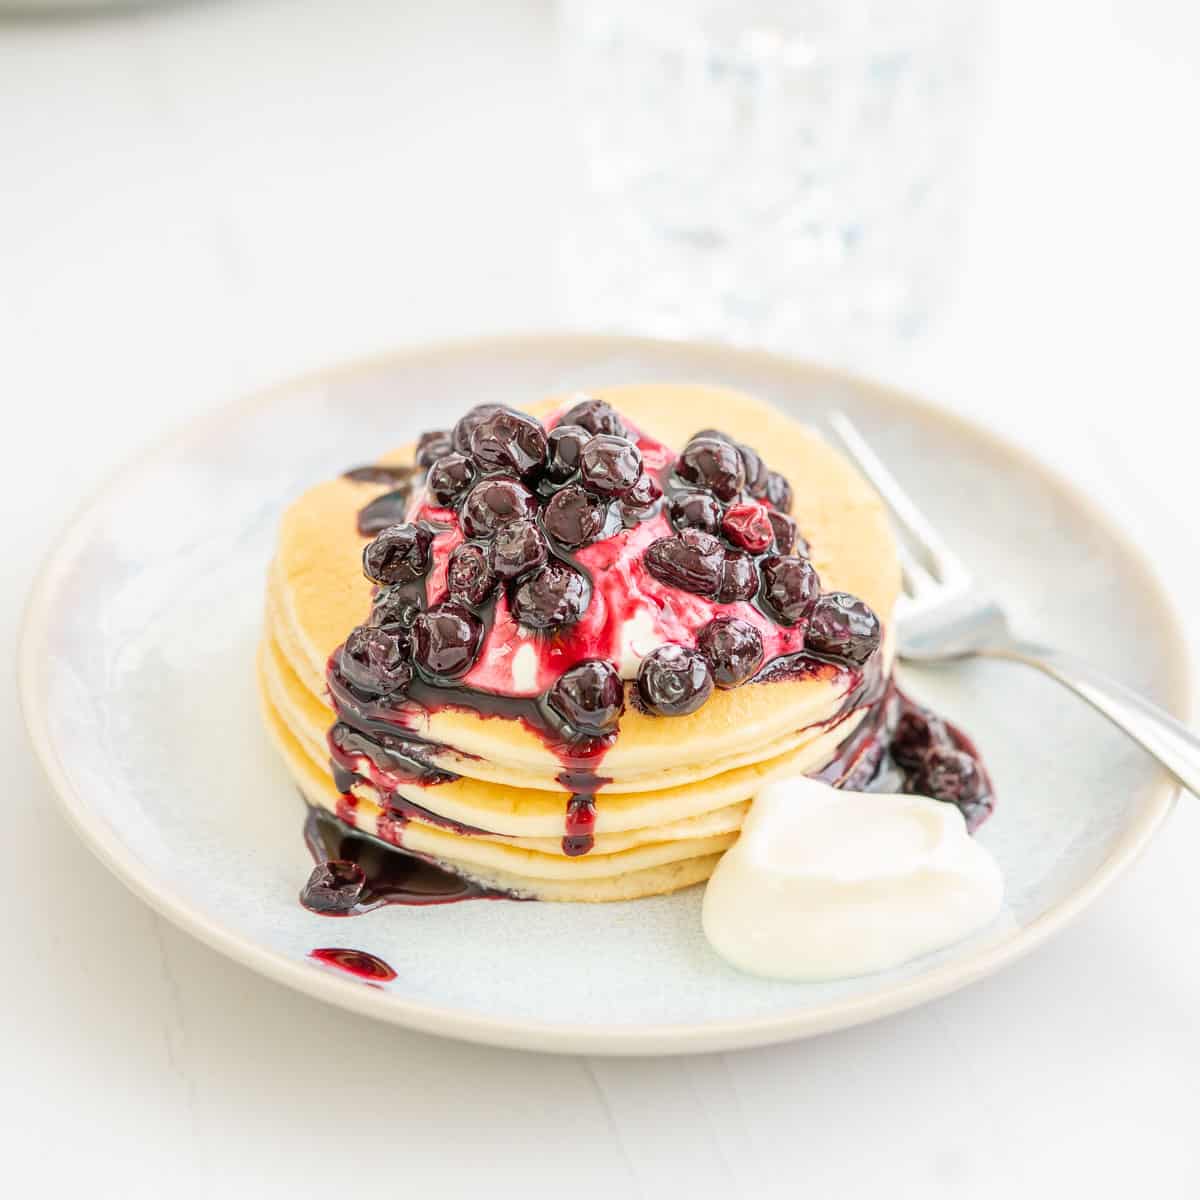 A short stack of pancakes drizzled with blueberry compote and yoghurt.